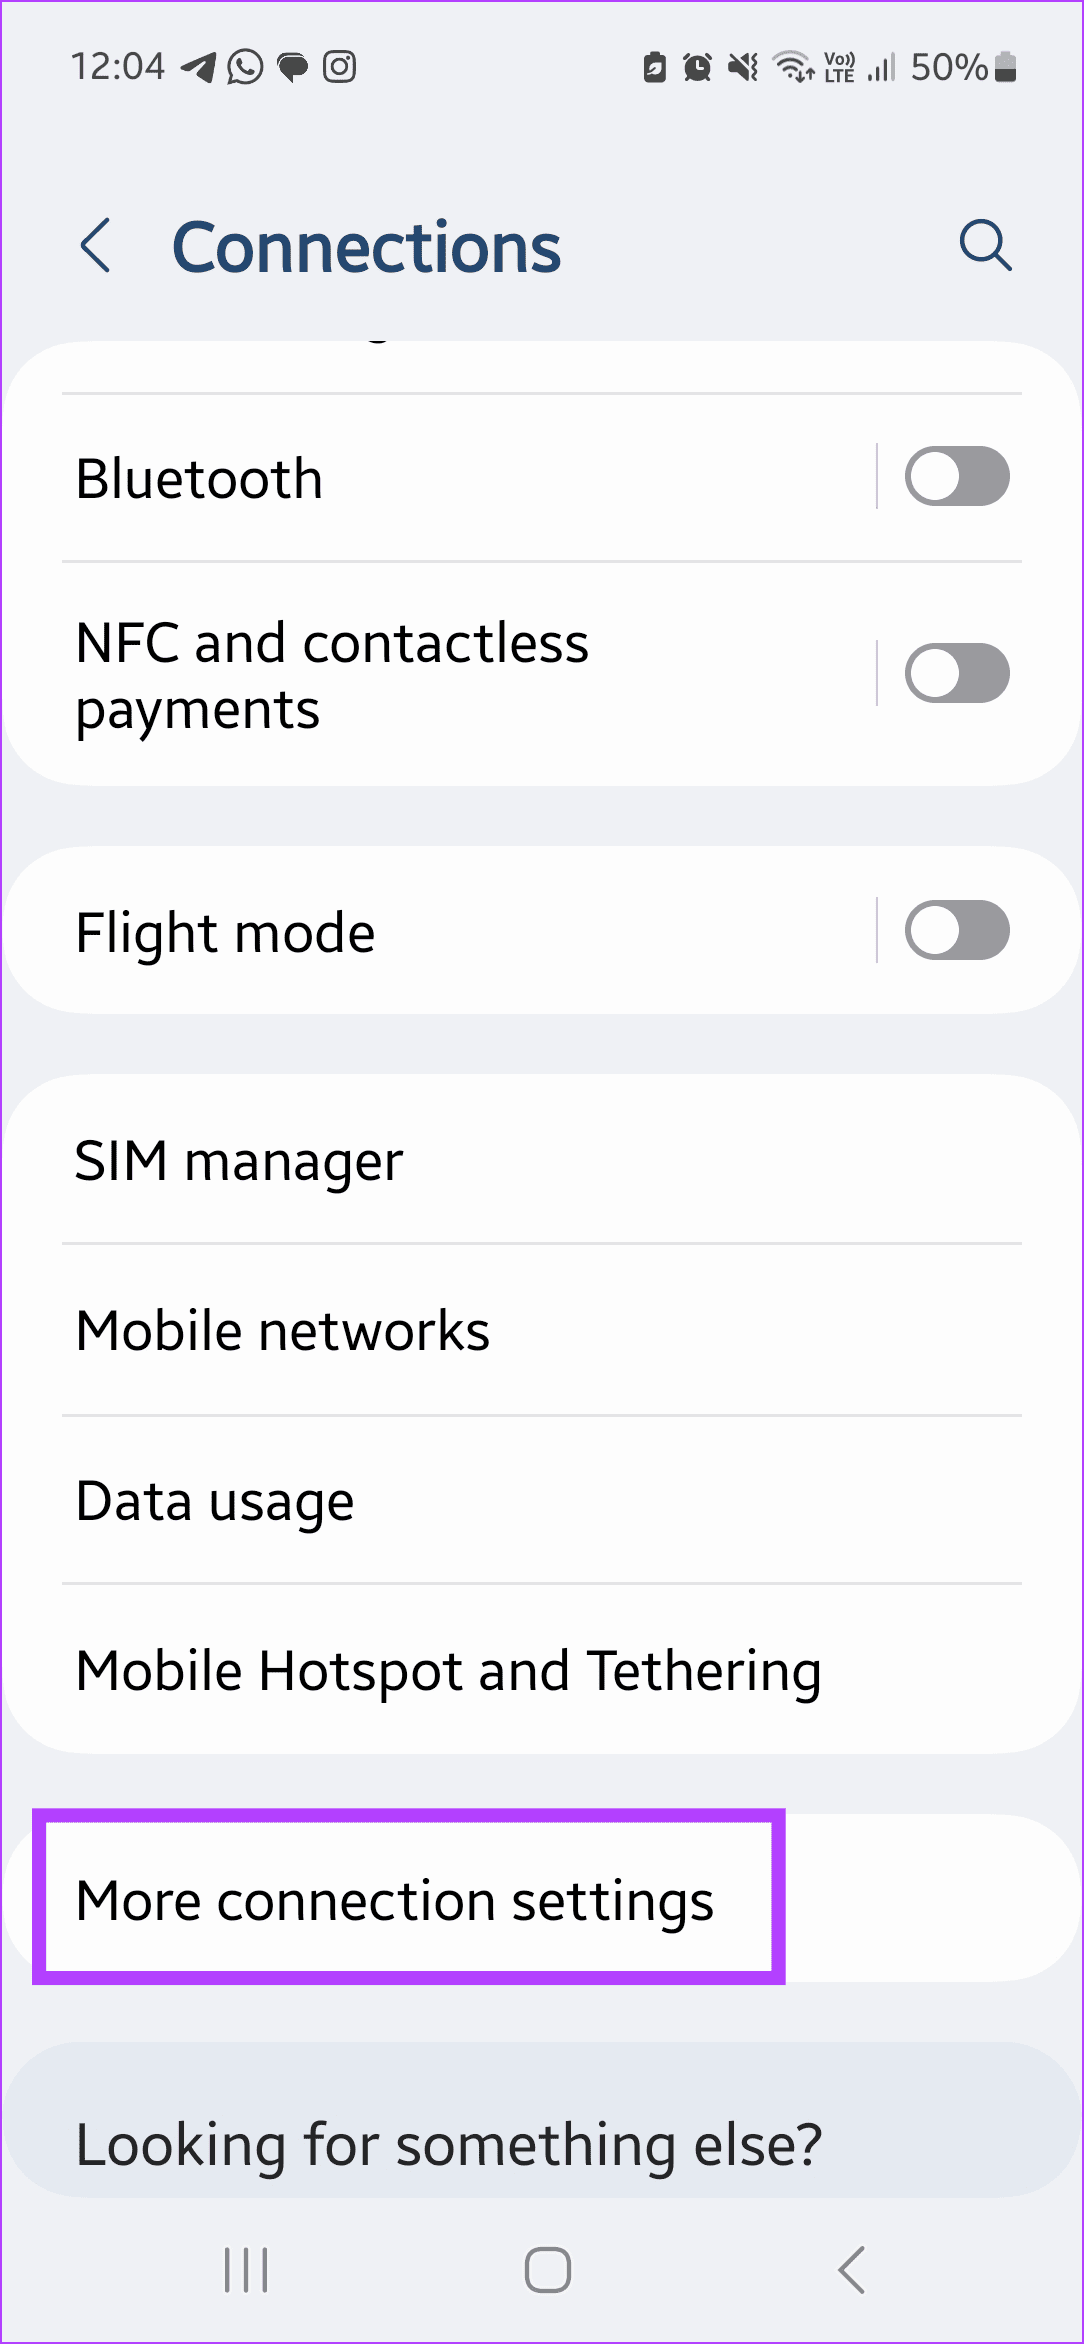 Tap on More connection settings